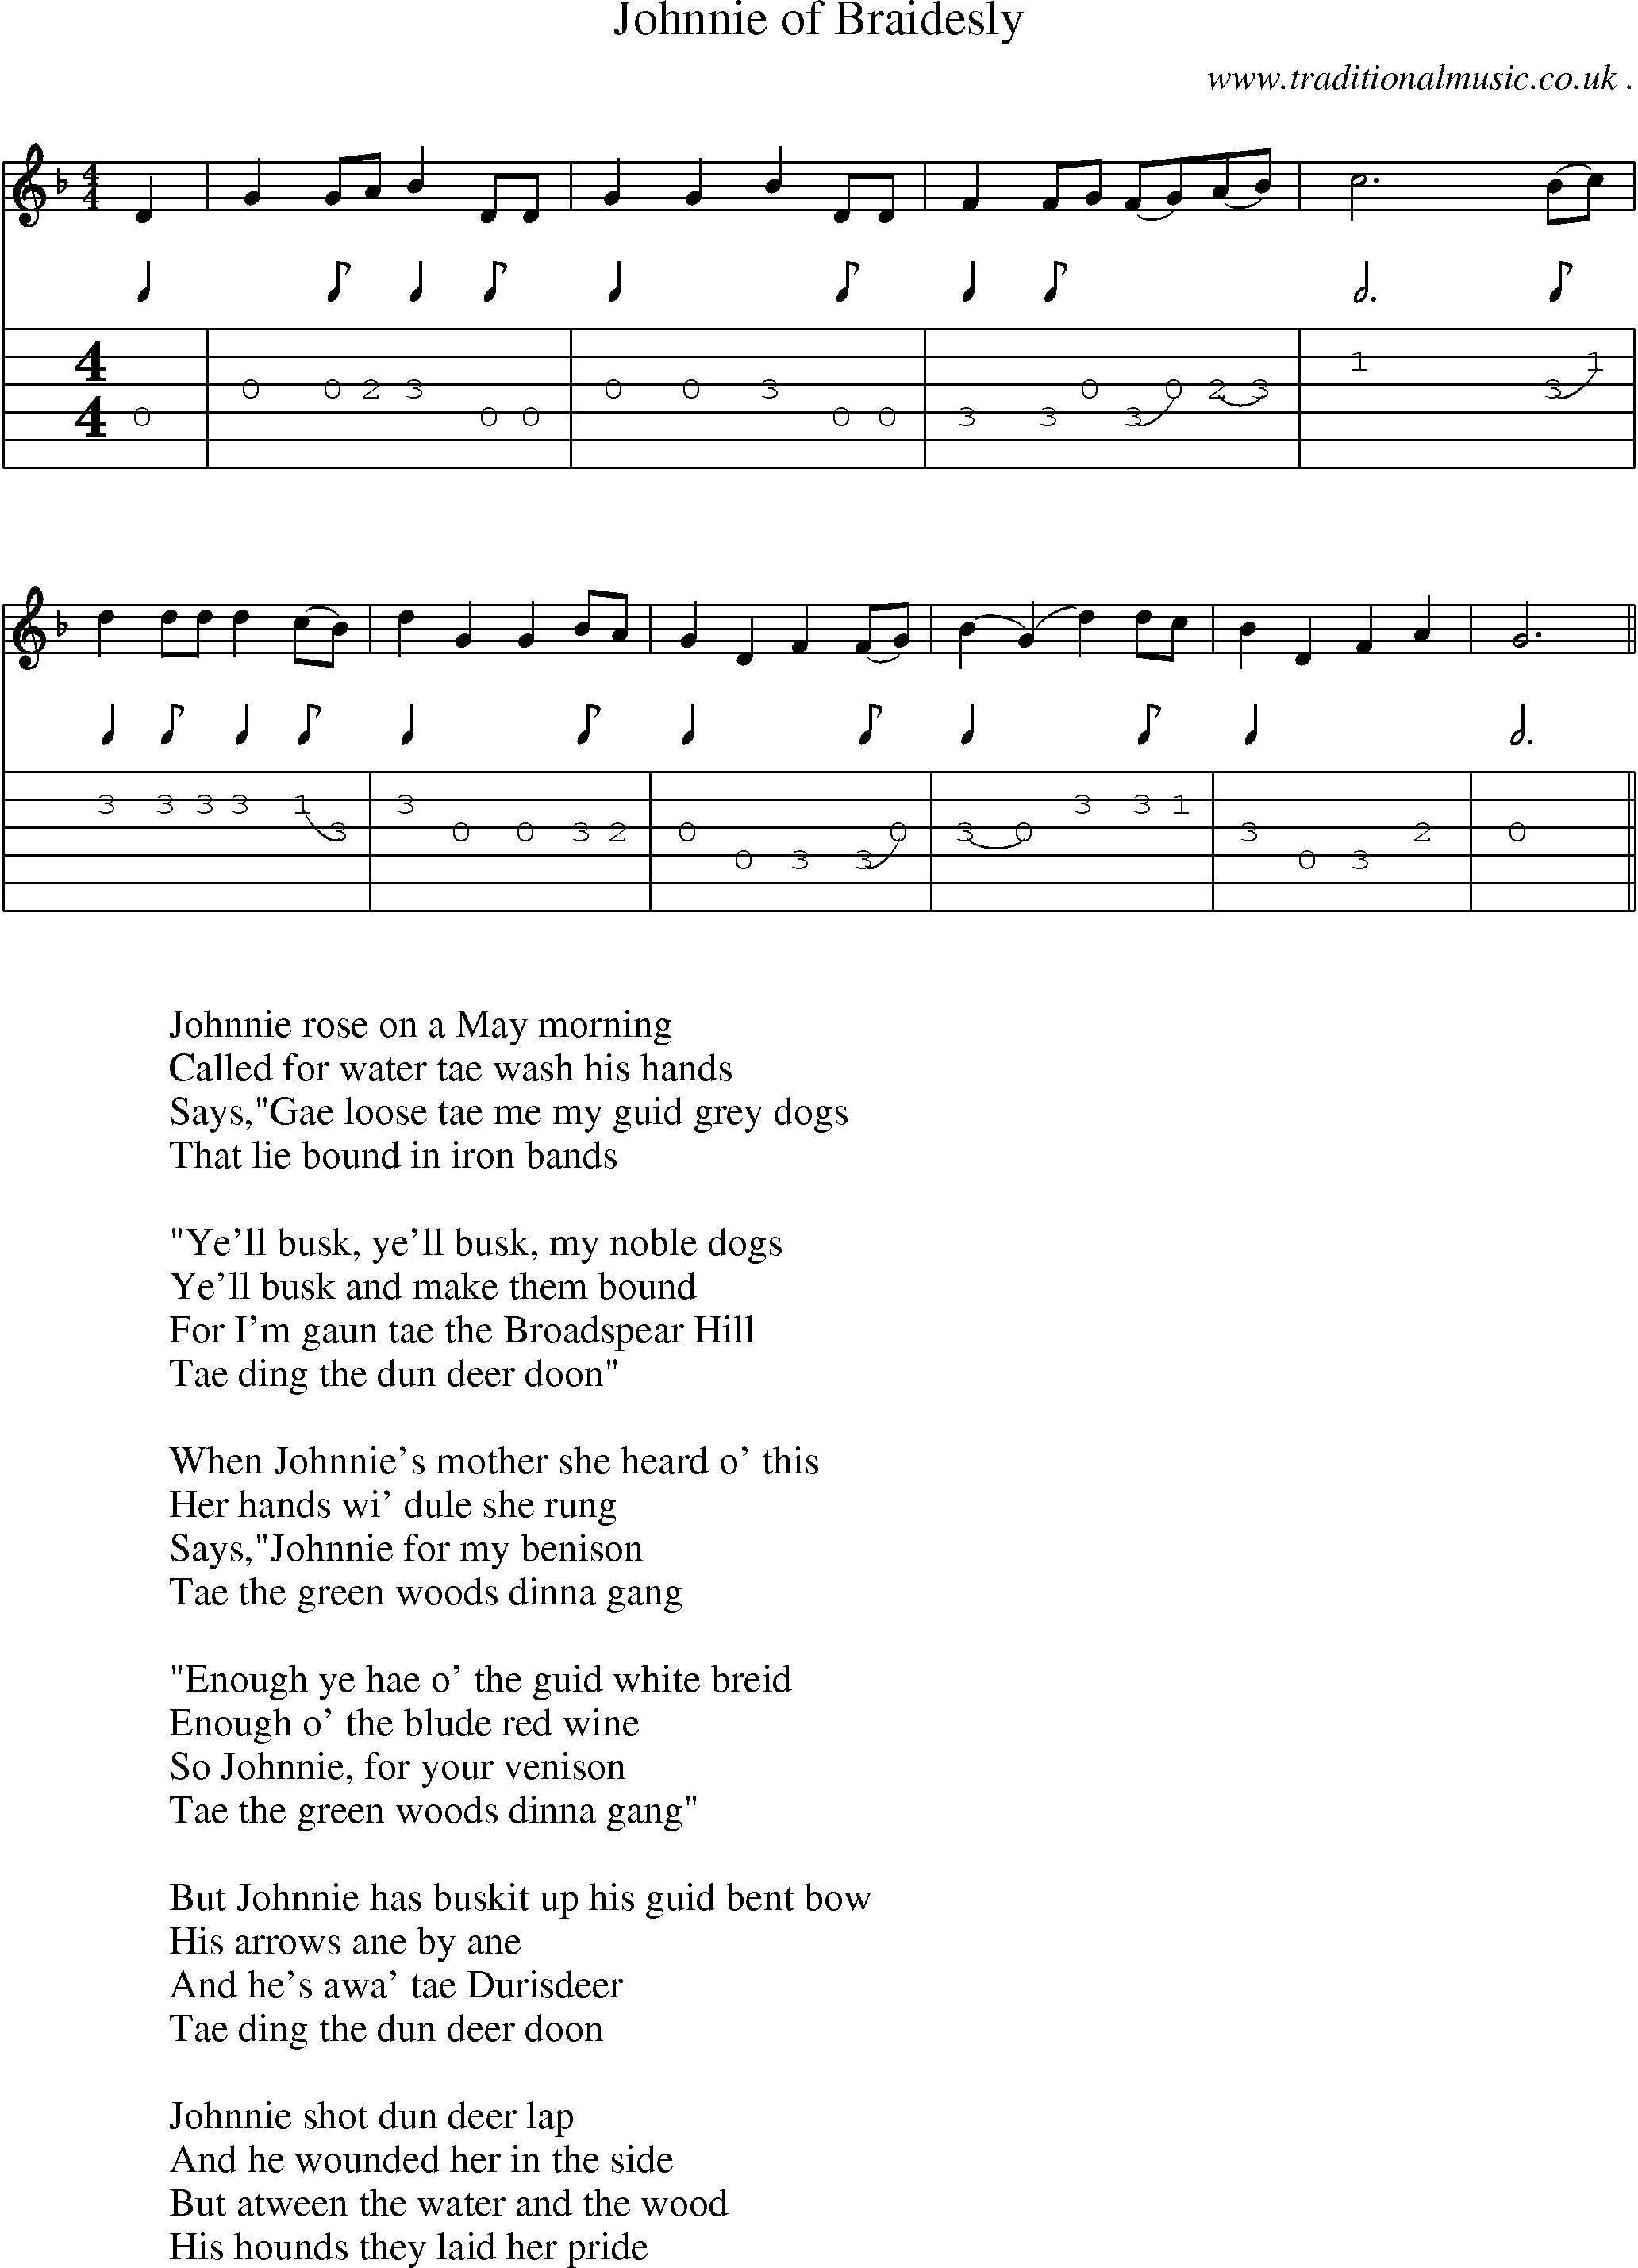 Sheet-Music and Guitar Tabs for Johnnie Of Braidesly